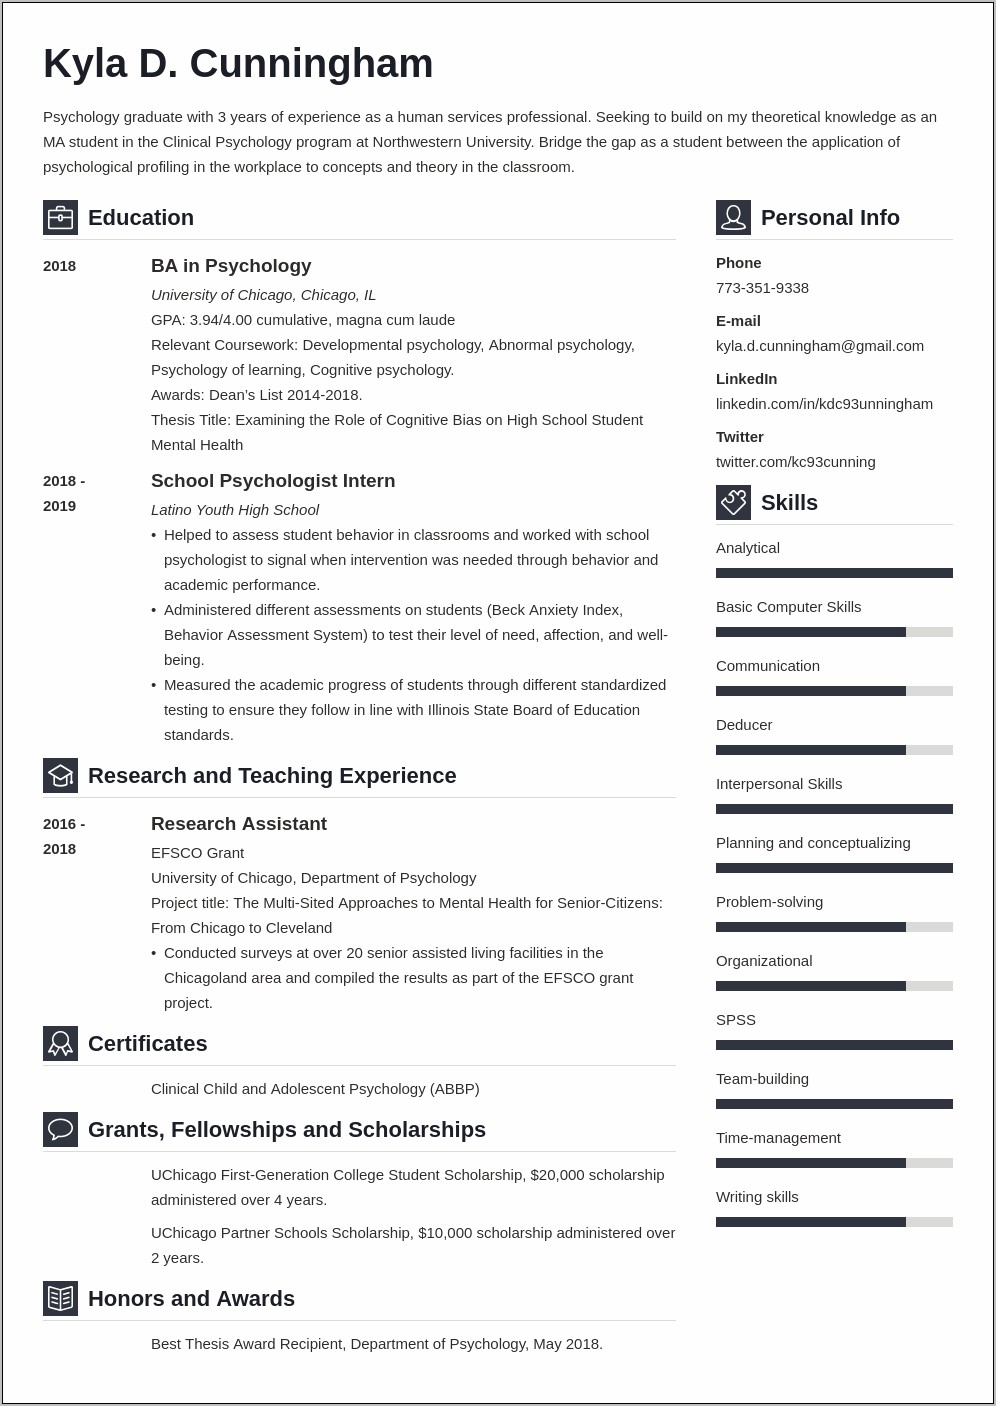 Resume Objective Examples For Graduate School Acceptance